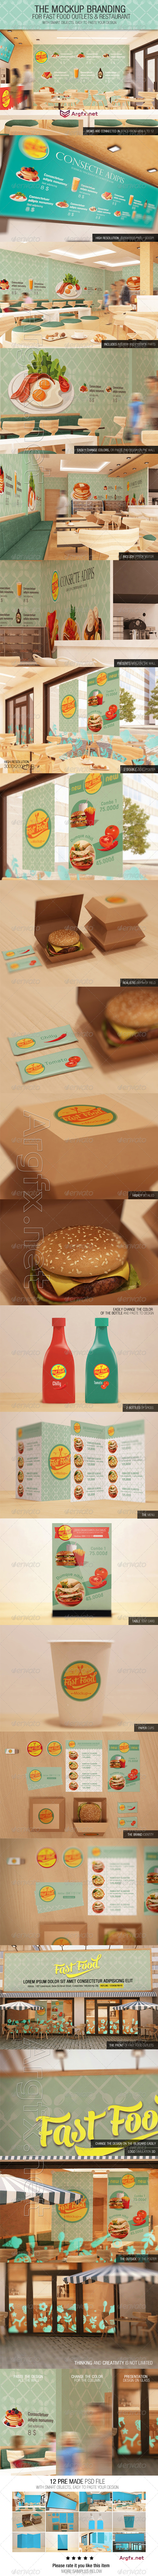 The Mockup Branding For Fast Food Outlets by 740848